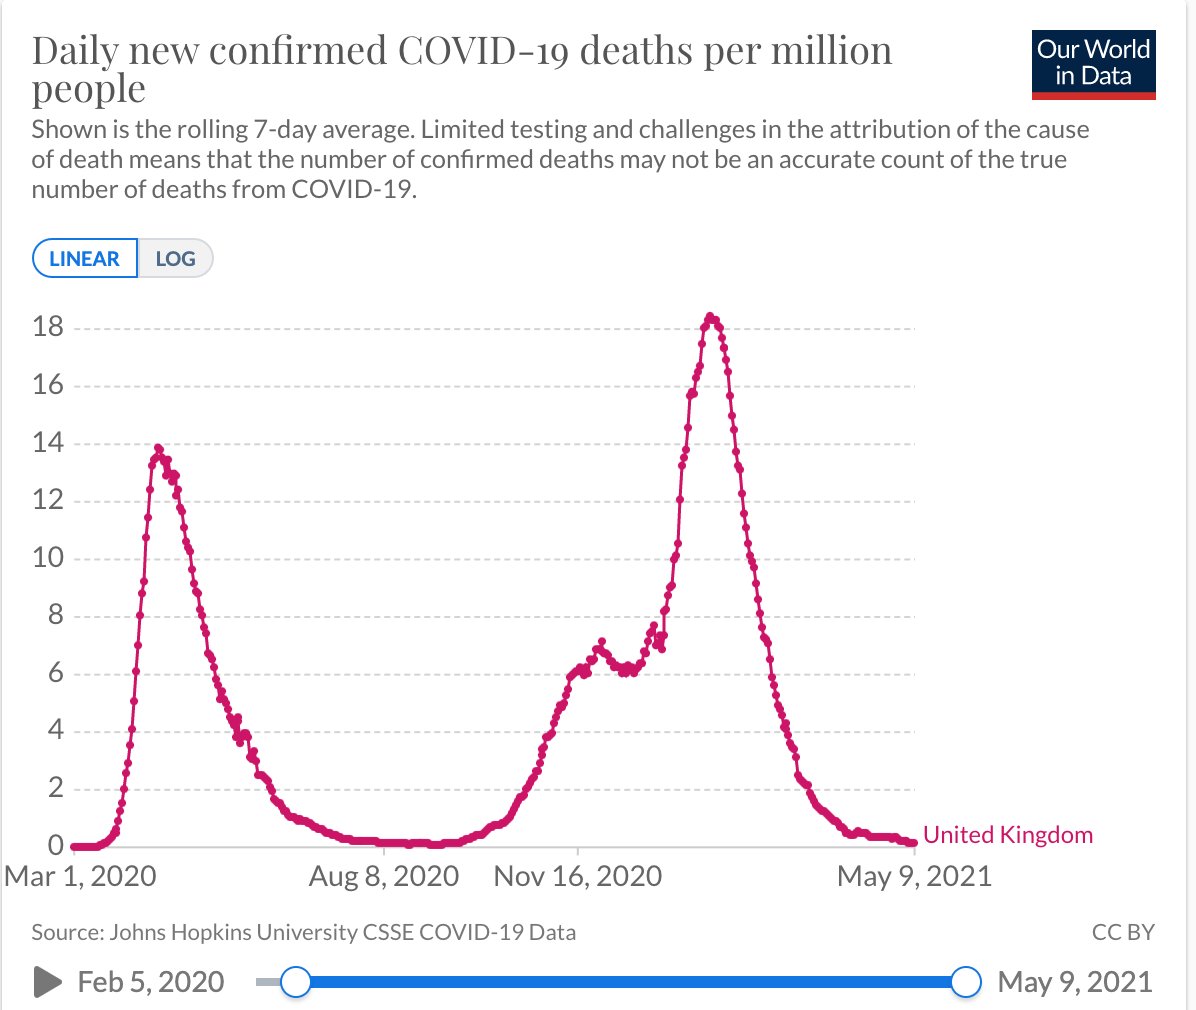 ICU patients and lives lost if we combine a vaccine rollout with public health restrictions. That's what the UK did and today they reported zero deaths for the first time in over a year. https://twitter.com/BNODesk/status/1391786009587822594